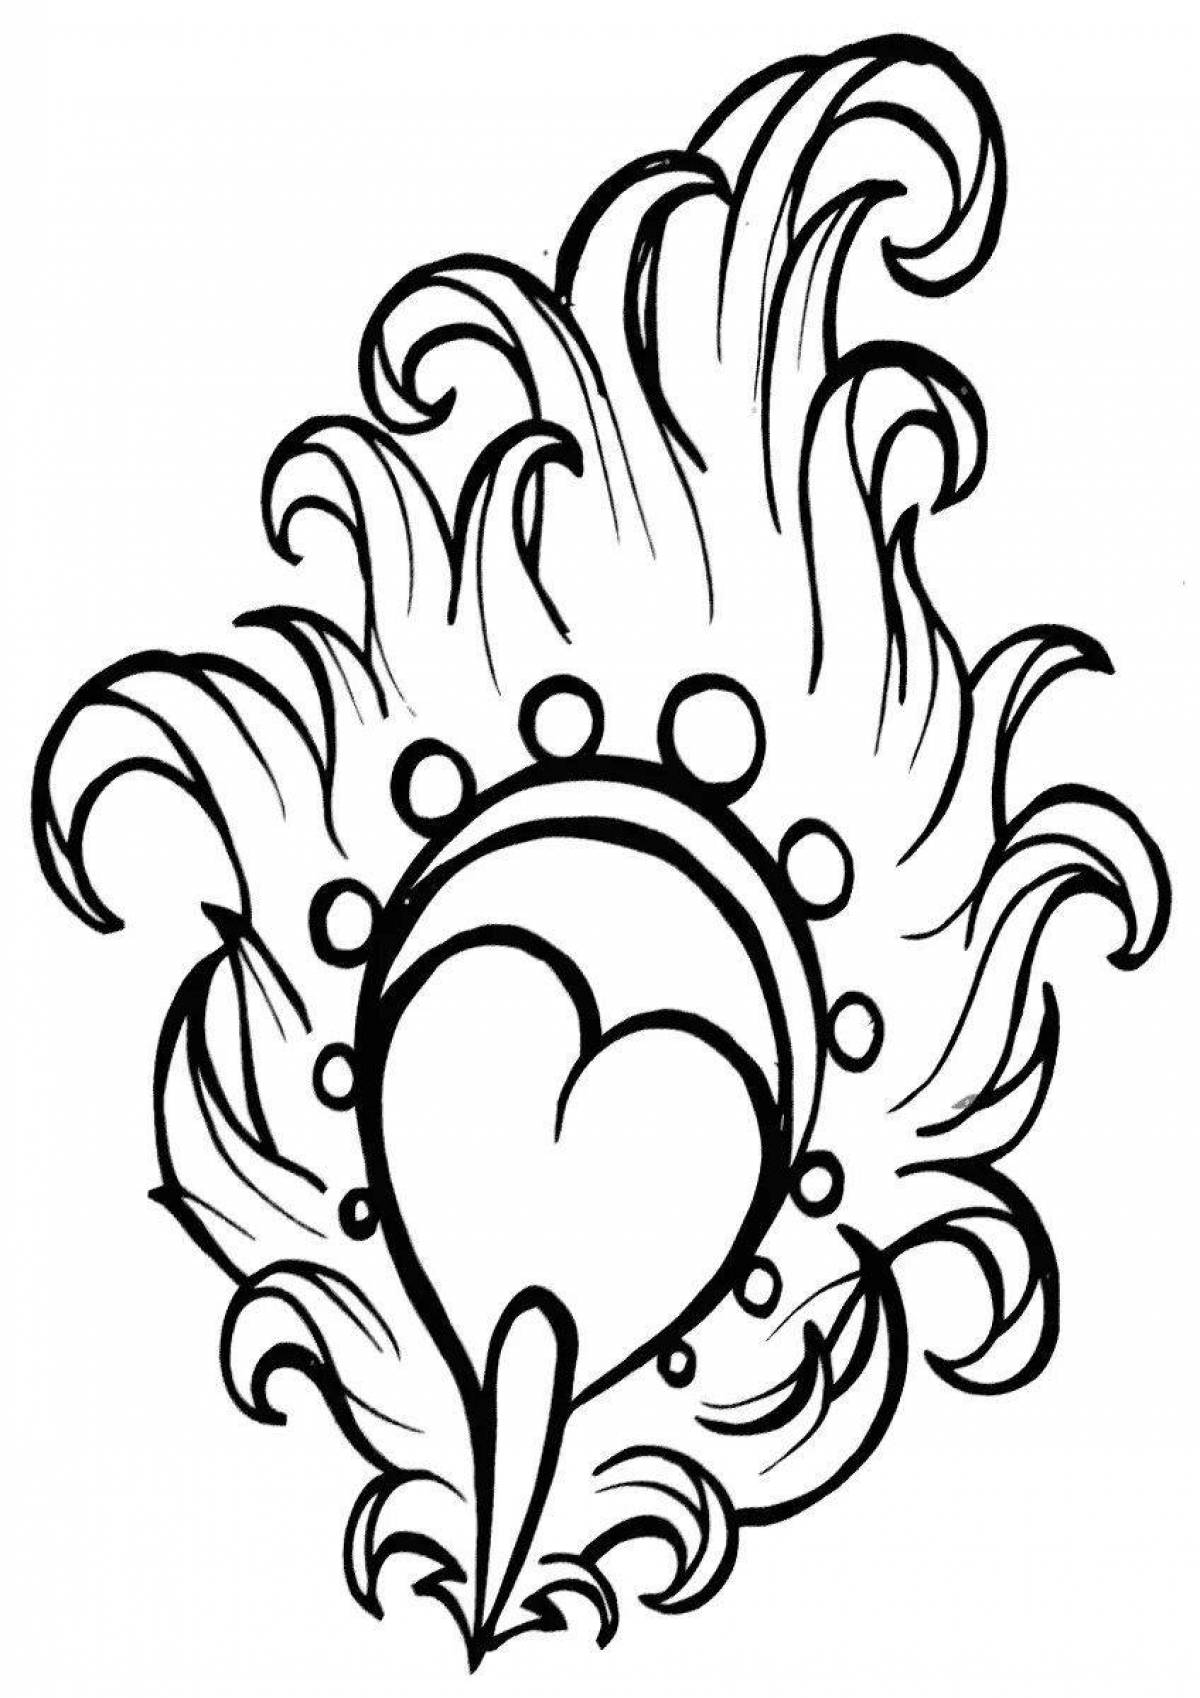 Coloring page elegant peacock feather for kids